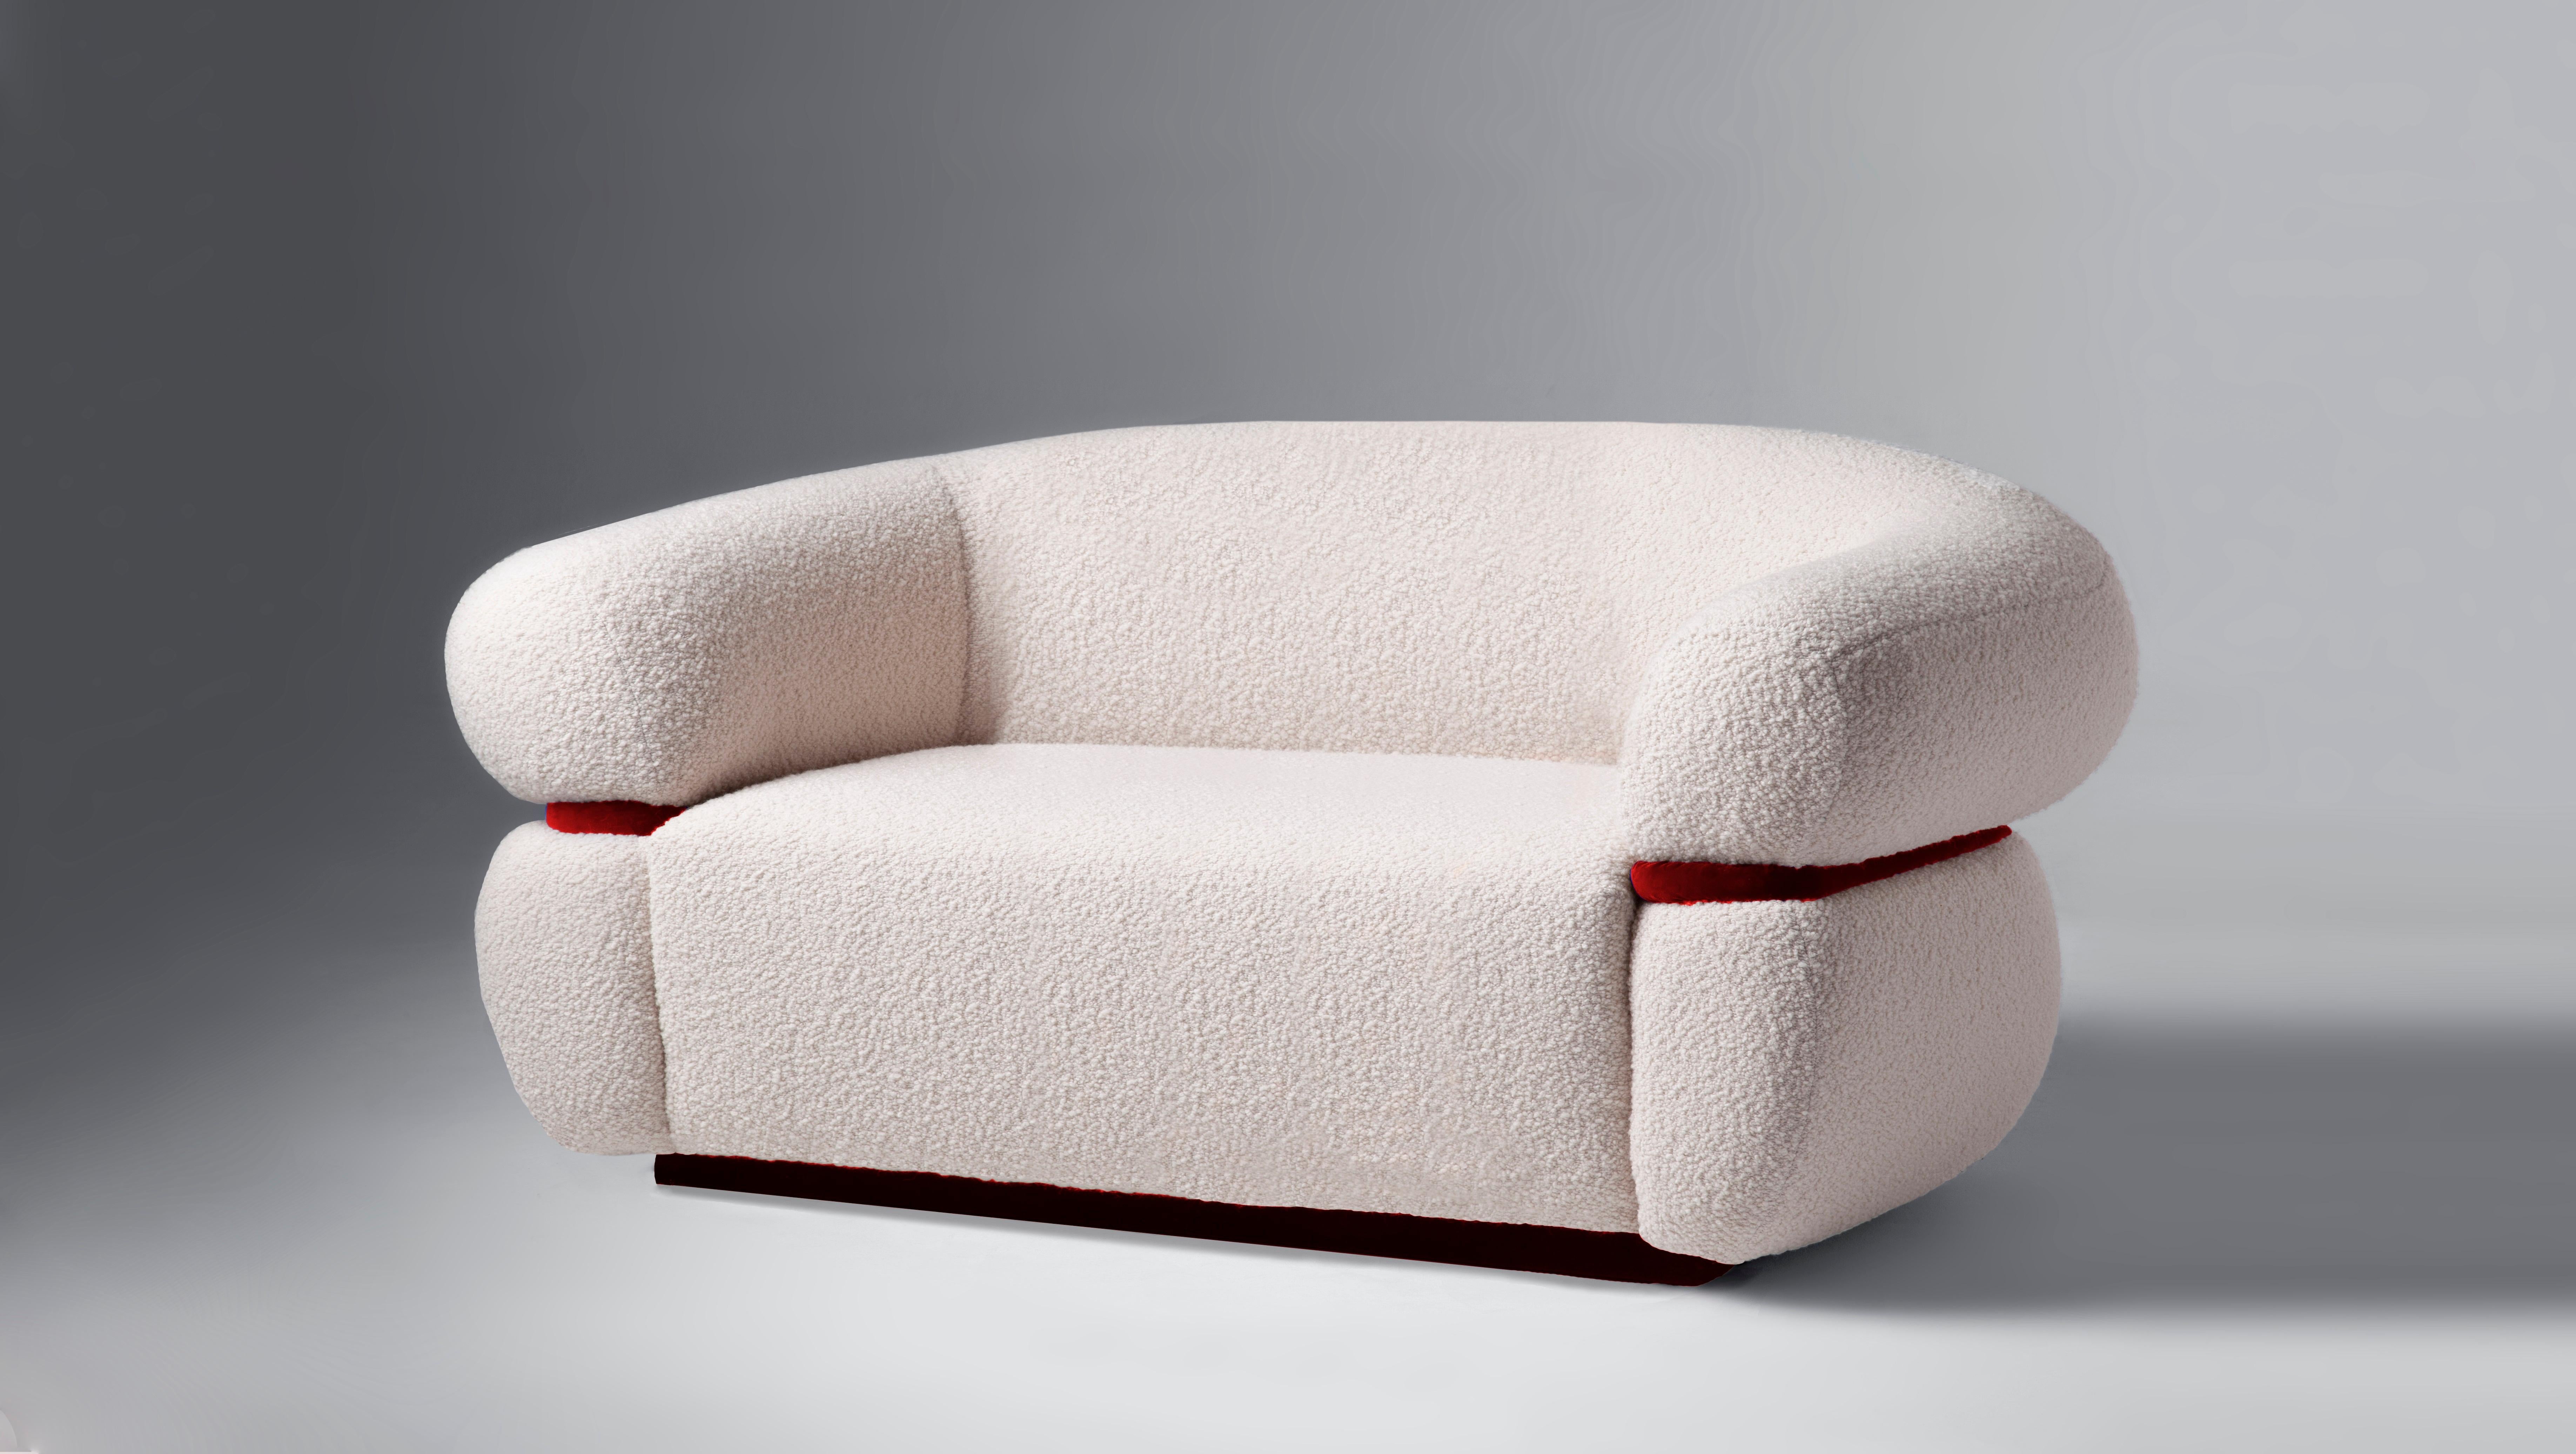 Like a warm embrace, Malibu Sofa welcomes you to stay within and relax. An elevated homage to the golden age of midcentury design and organic architecture, it radiates through its unusual proportions and strong curves with softness and Fine